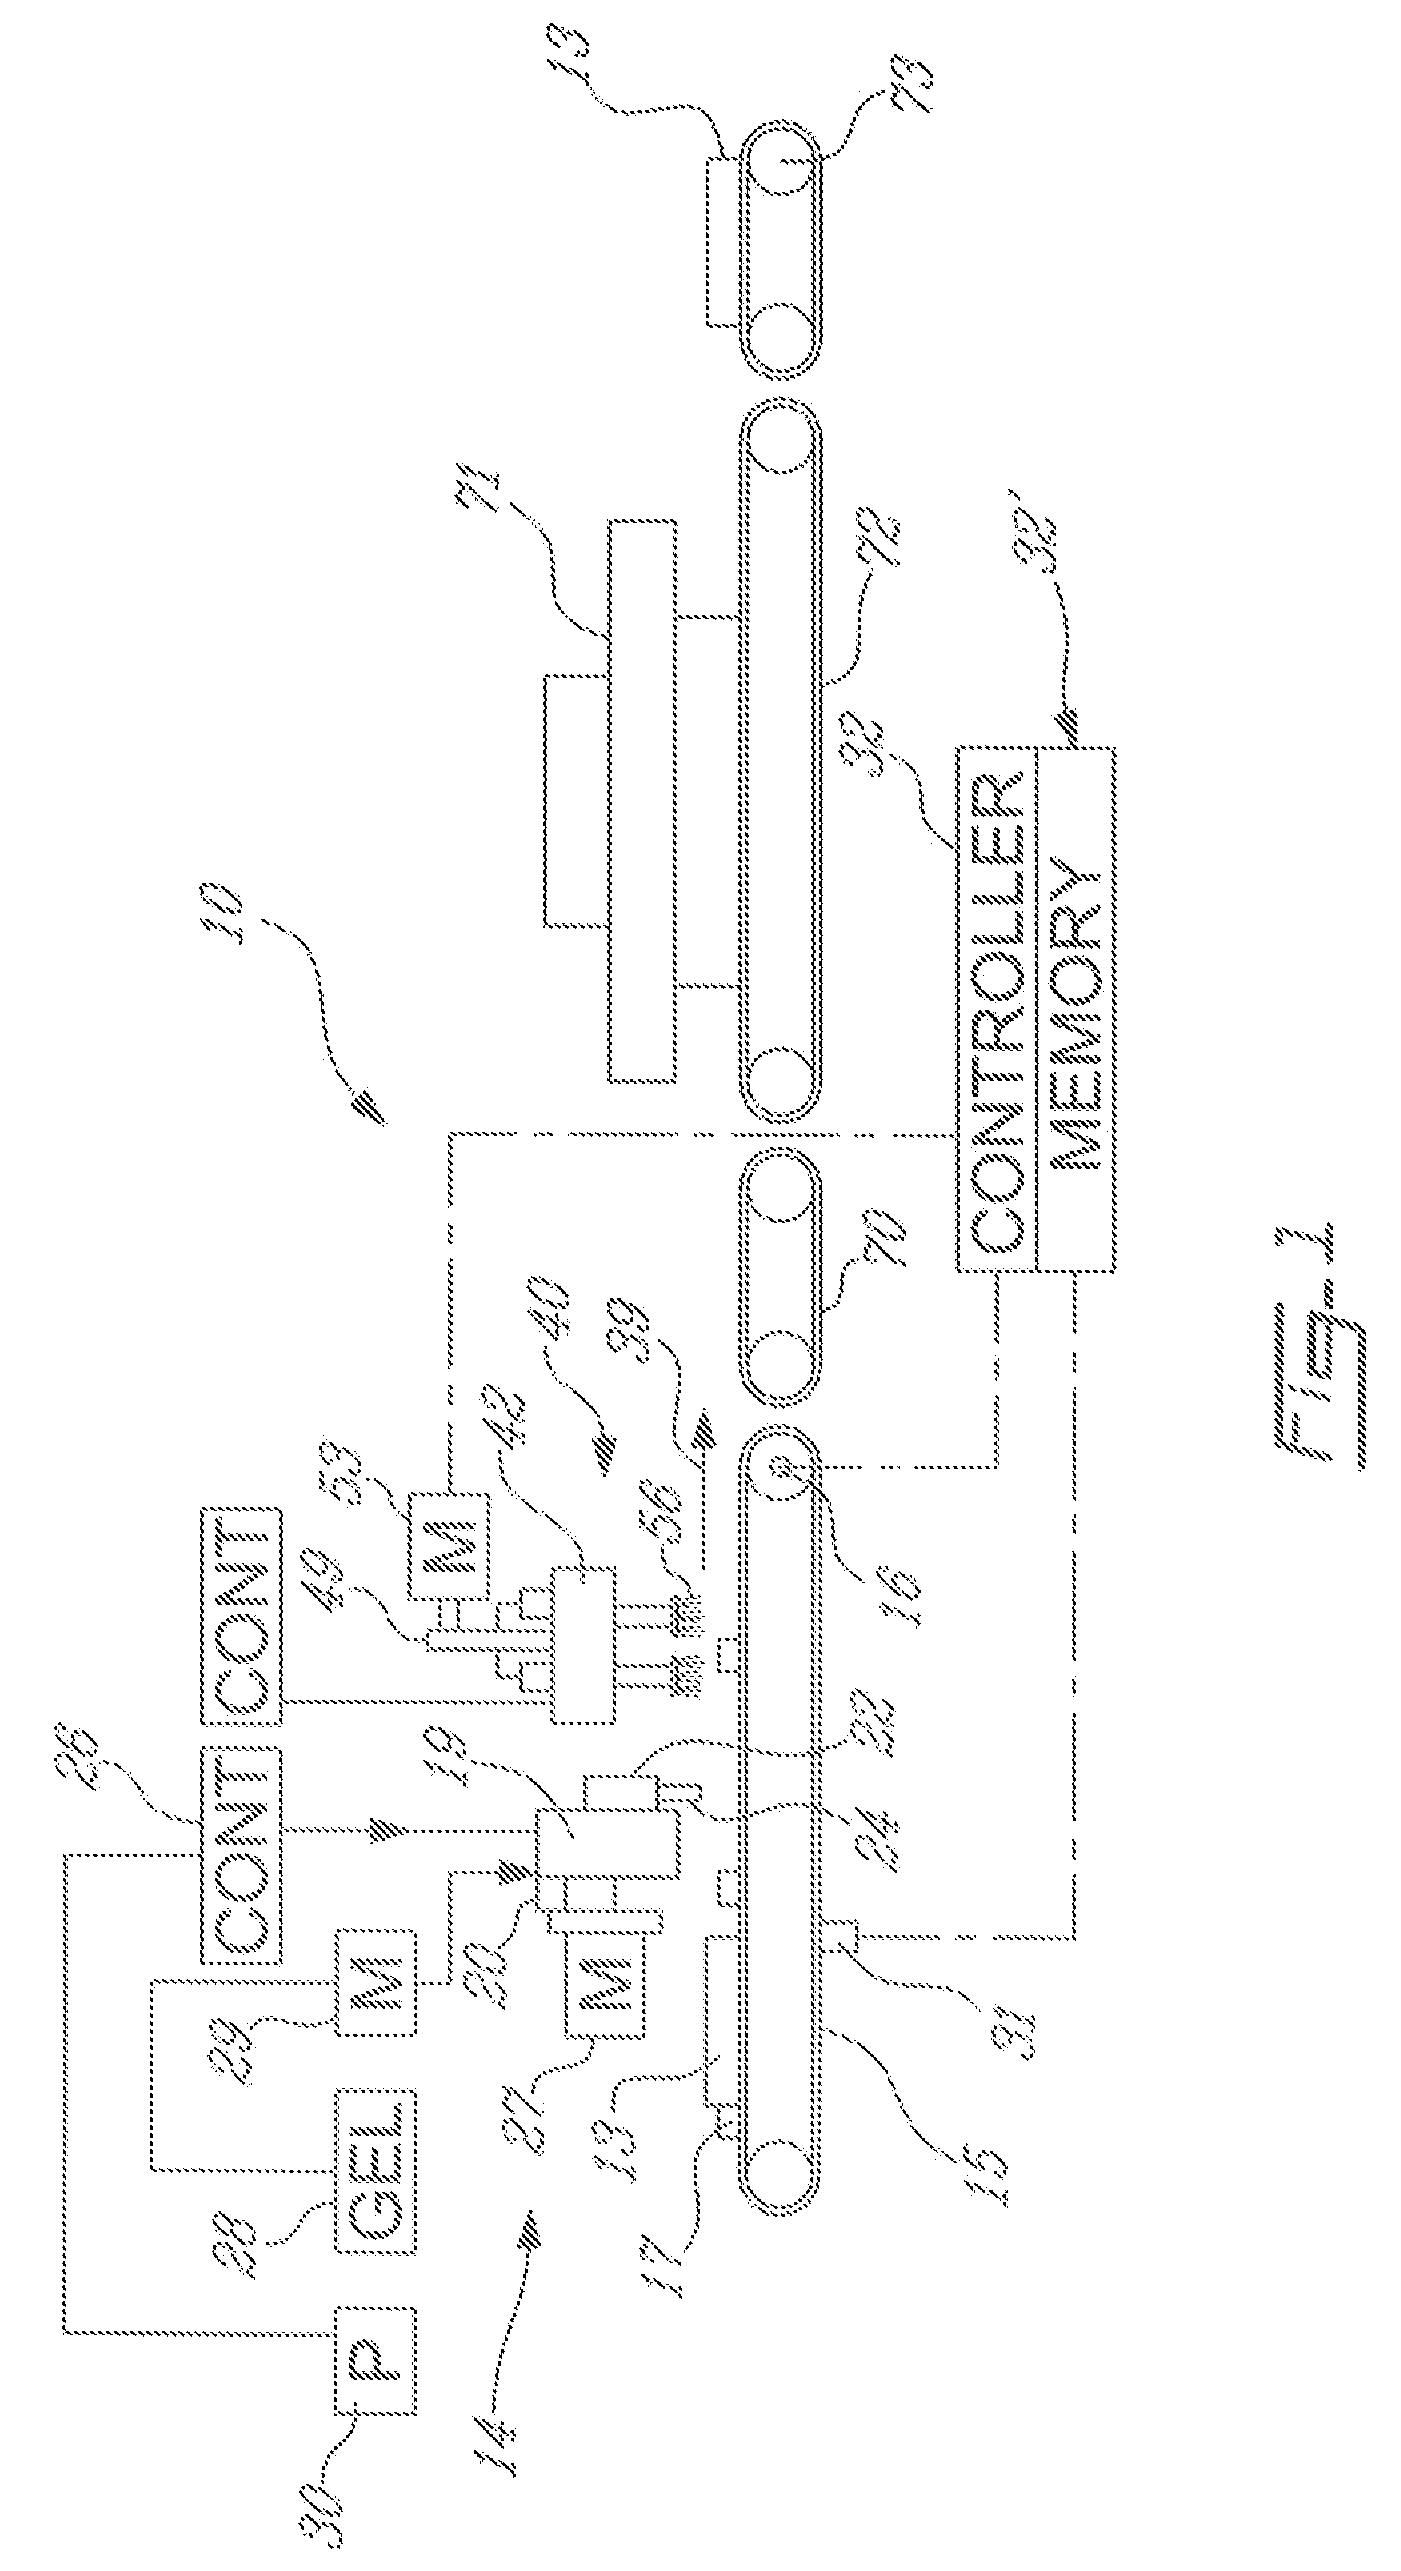 System and method of applying a gel coat brush stroke pattern over an image surface